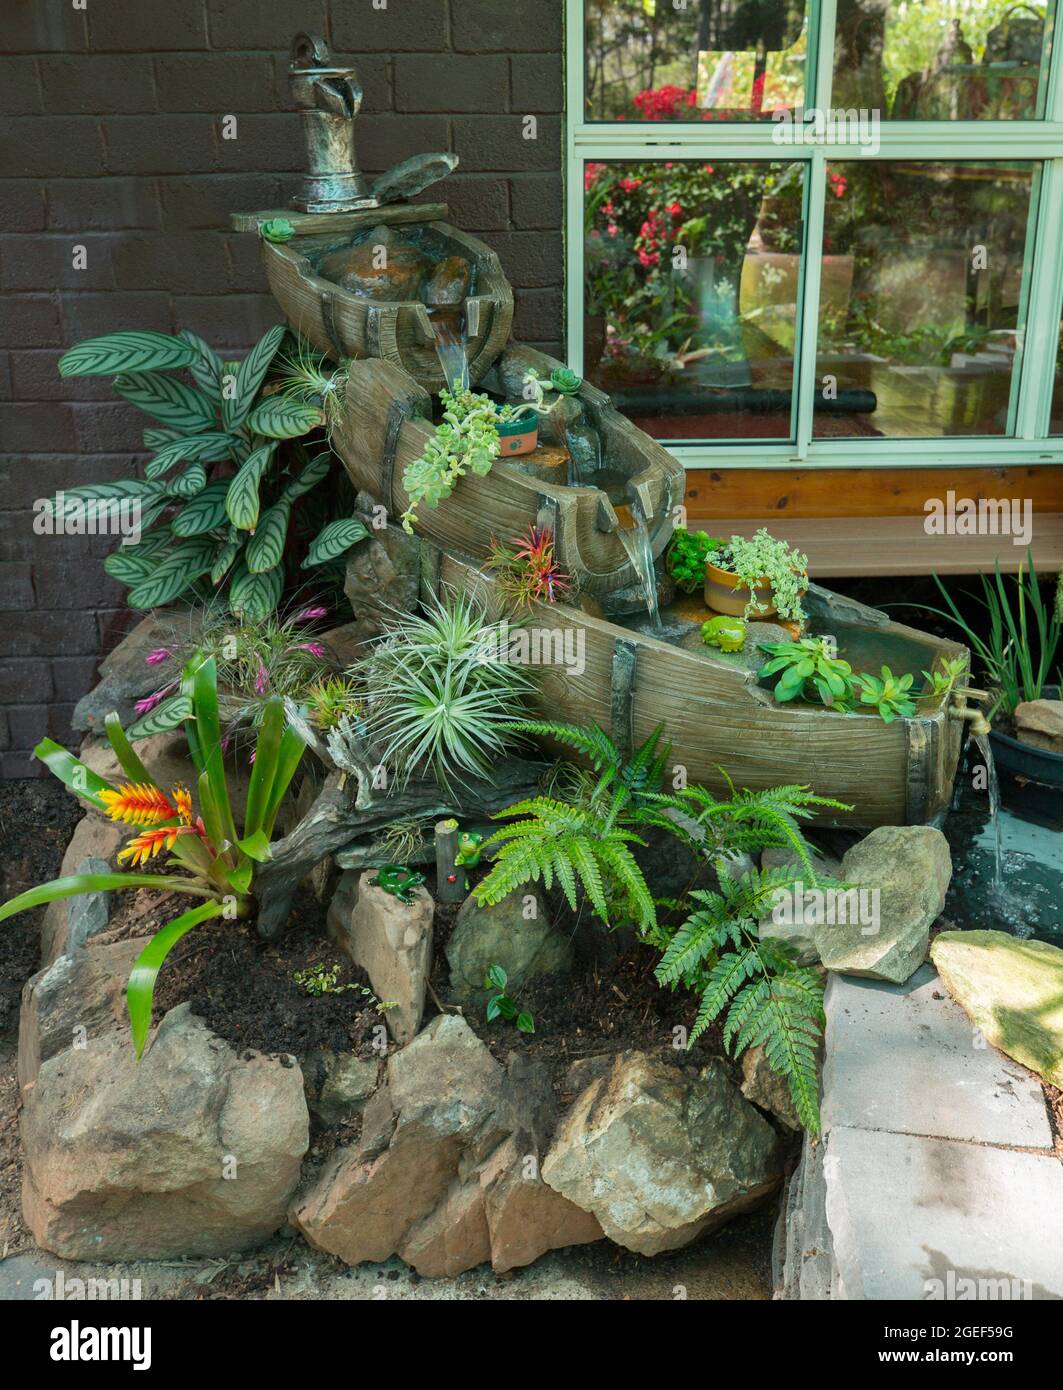 Decorative garden water feature, waterfall with water trickling over old wooden barrels on a rockery with ferns and bromeliads, in Australia Stock Photo